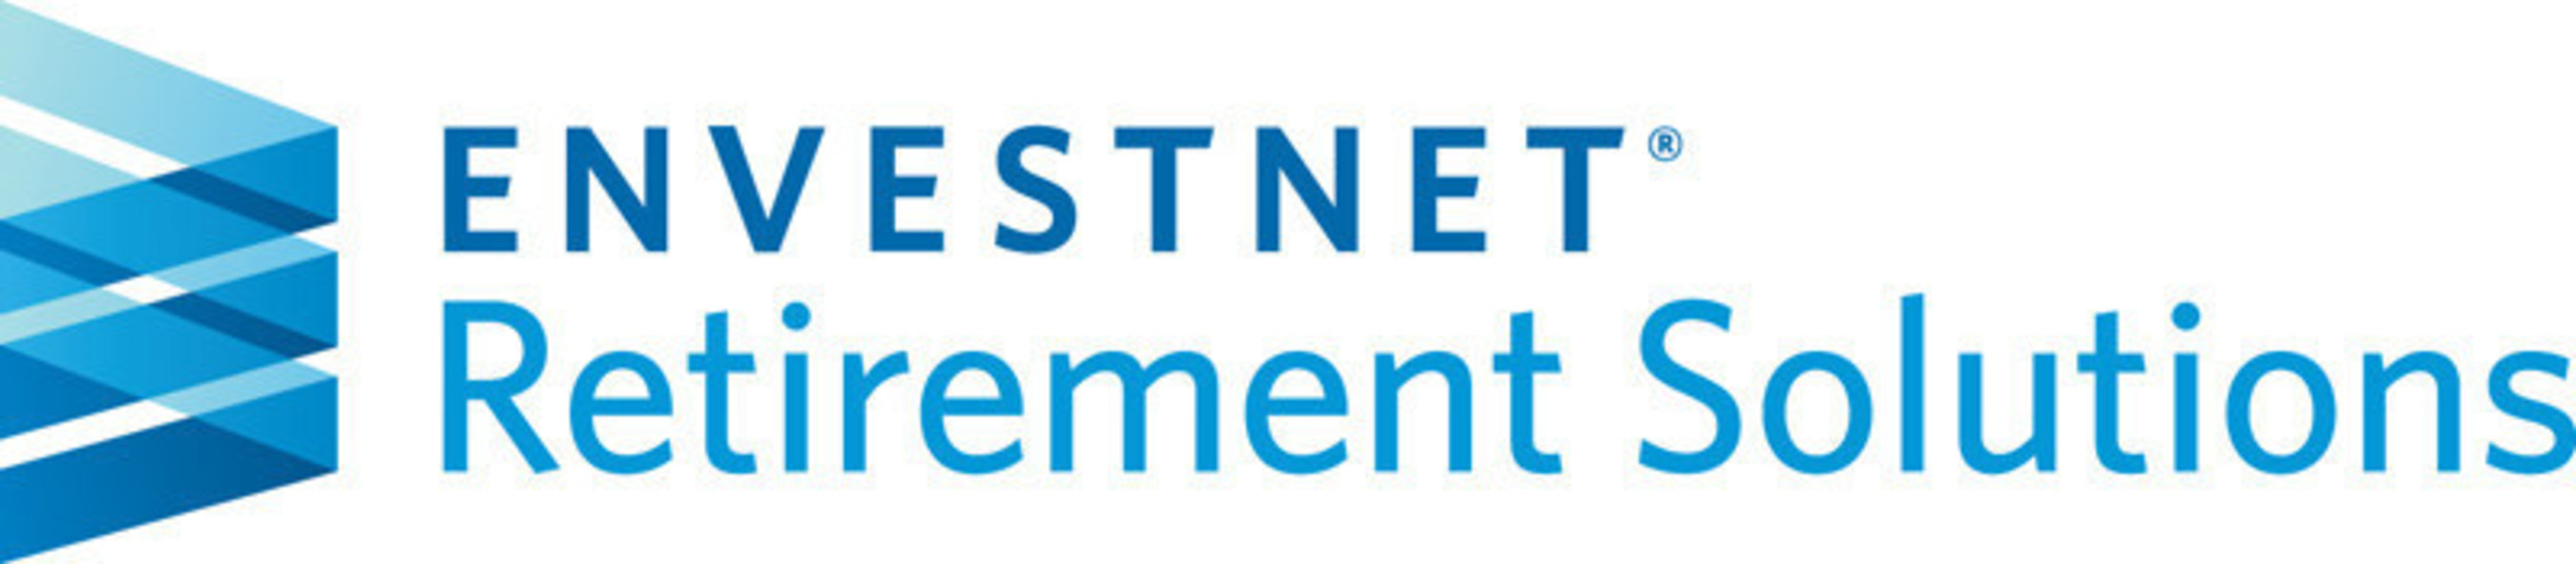 Envestnet | Retirement Solutions (ERS), a subsidiary of Envestnet, Inc., provides retirement advisors with an integrated platform that combines one of the industry's leading practice management technology, research and due diligence, data aggregation, compliance tools, and intelligent managed account solutions.